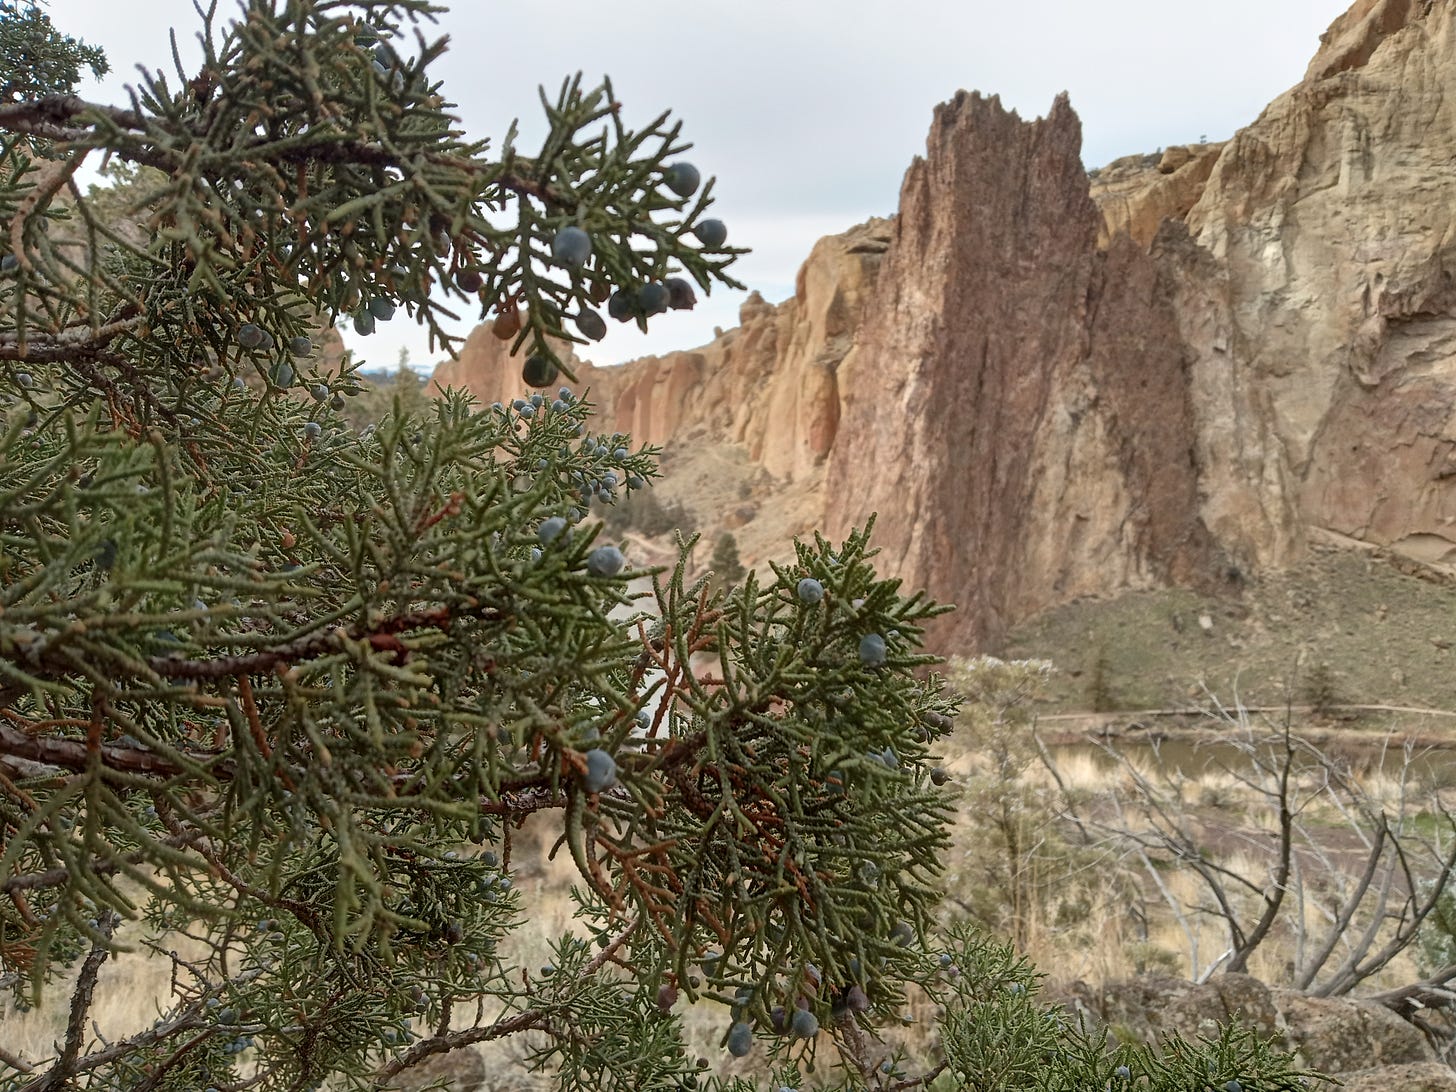 boughs of juniper full of berries are foregrounded against dramatic red-orange cliffs